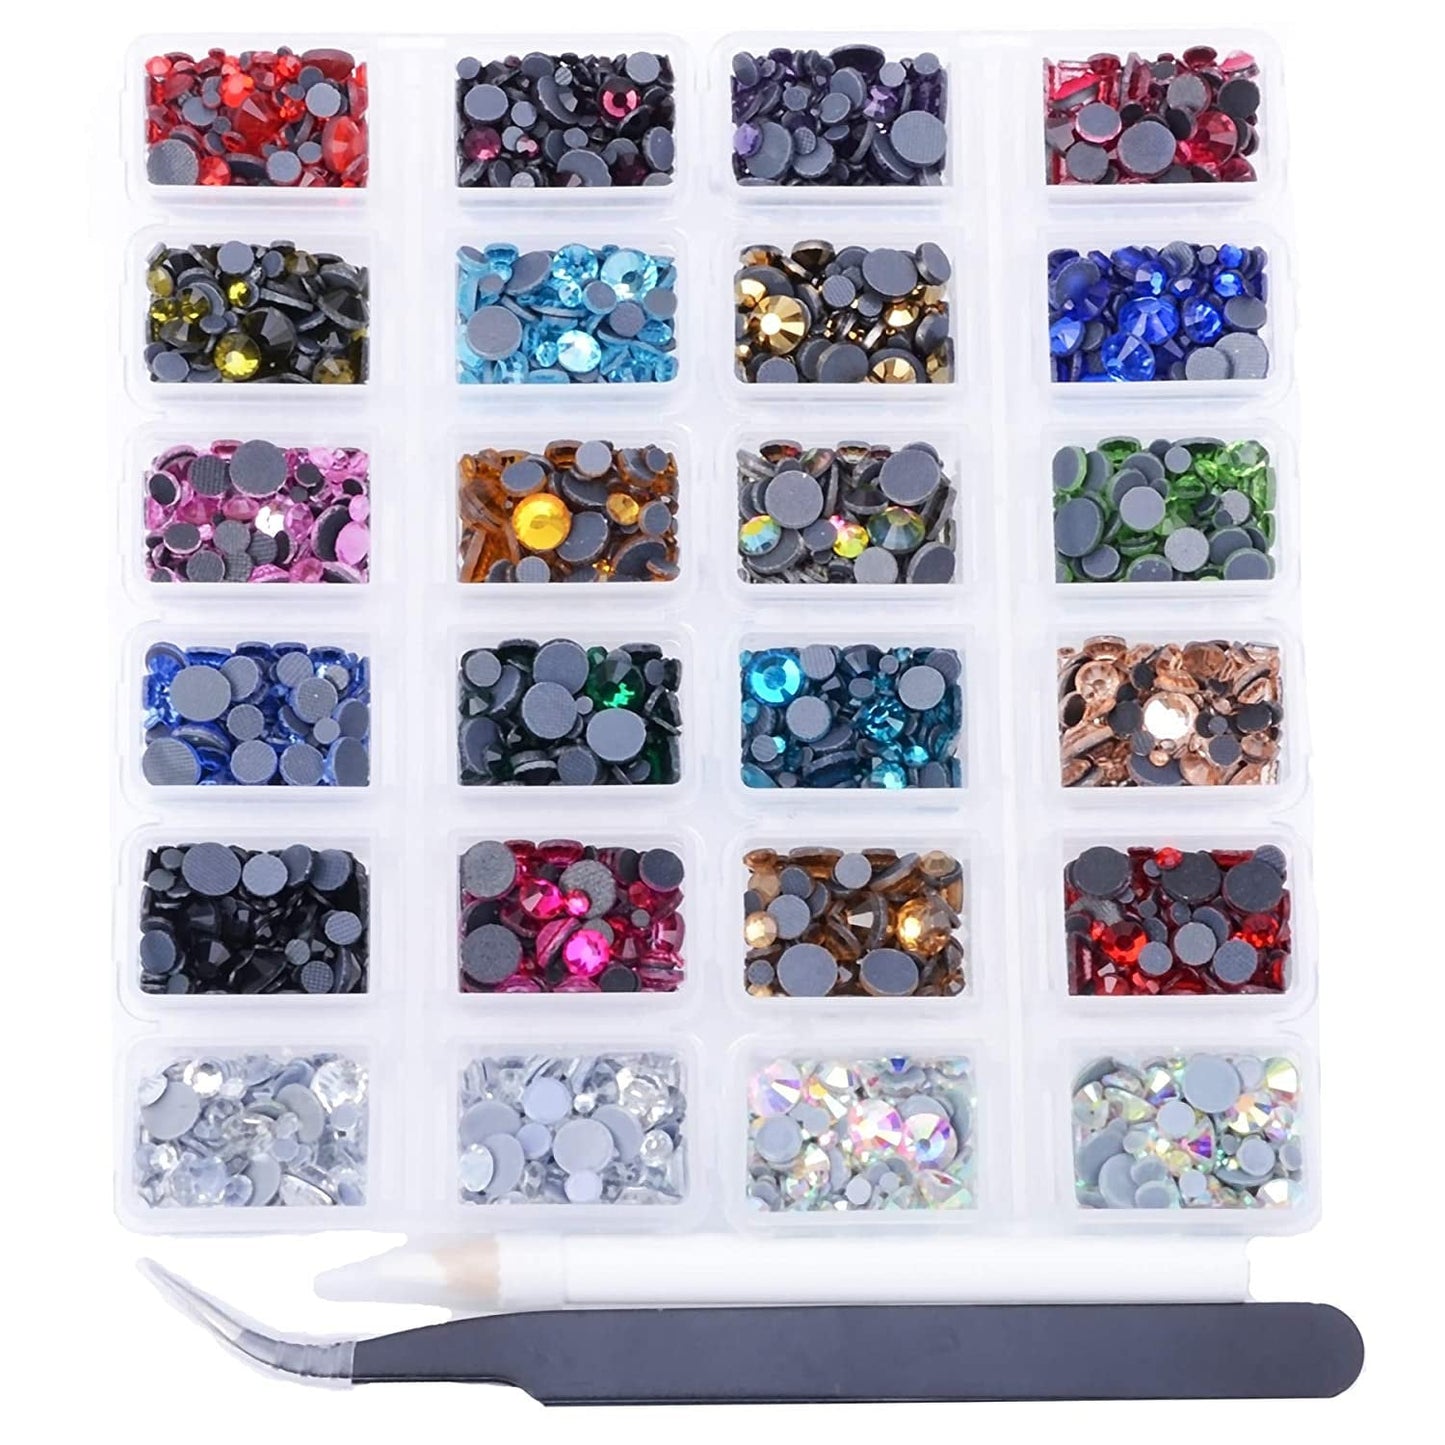 Hot fix Rhinestone Kit - Over 6800 Crystals - ss6 ss10 ss16 ss20 ss30 hot fix rhinestones